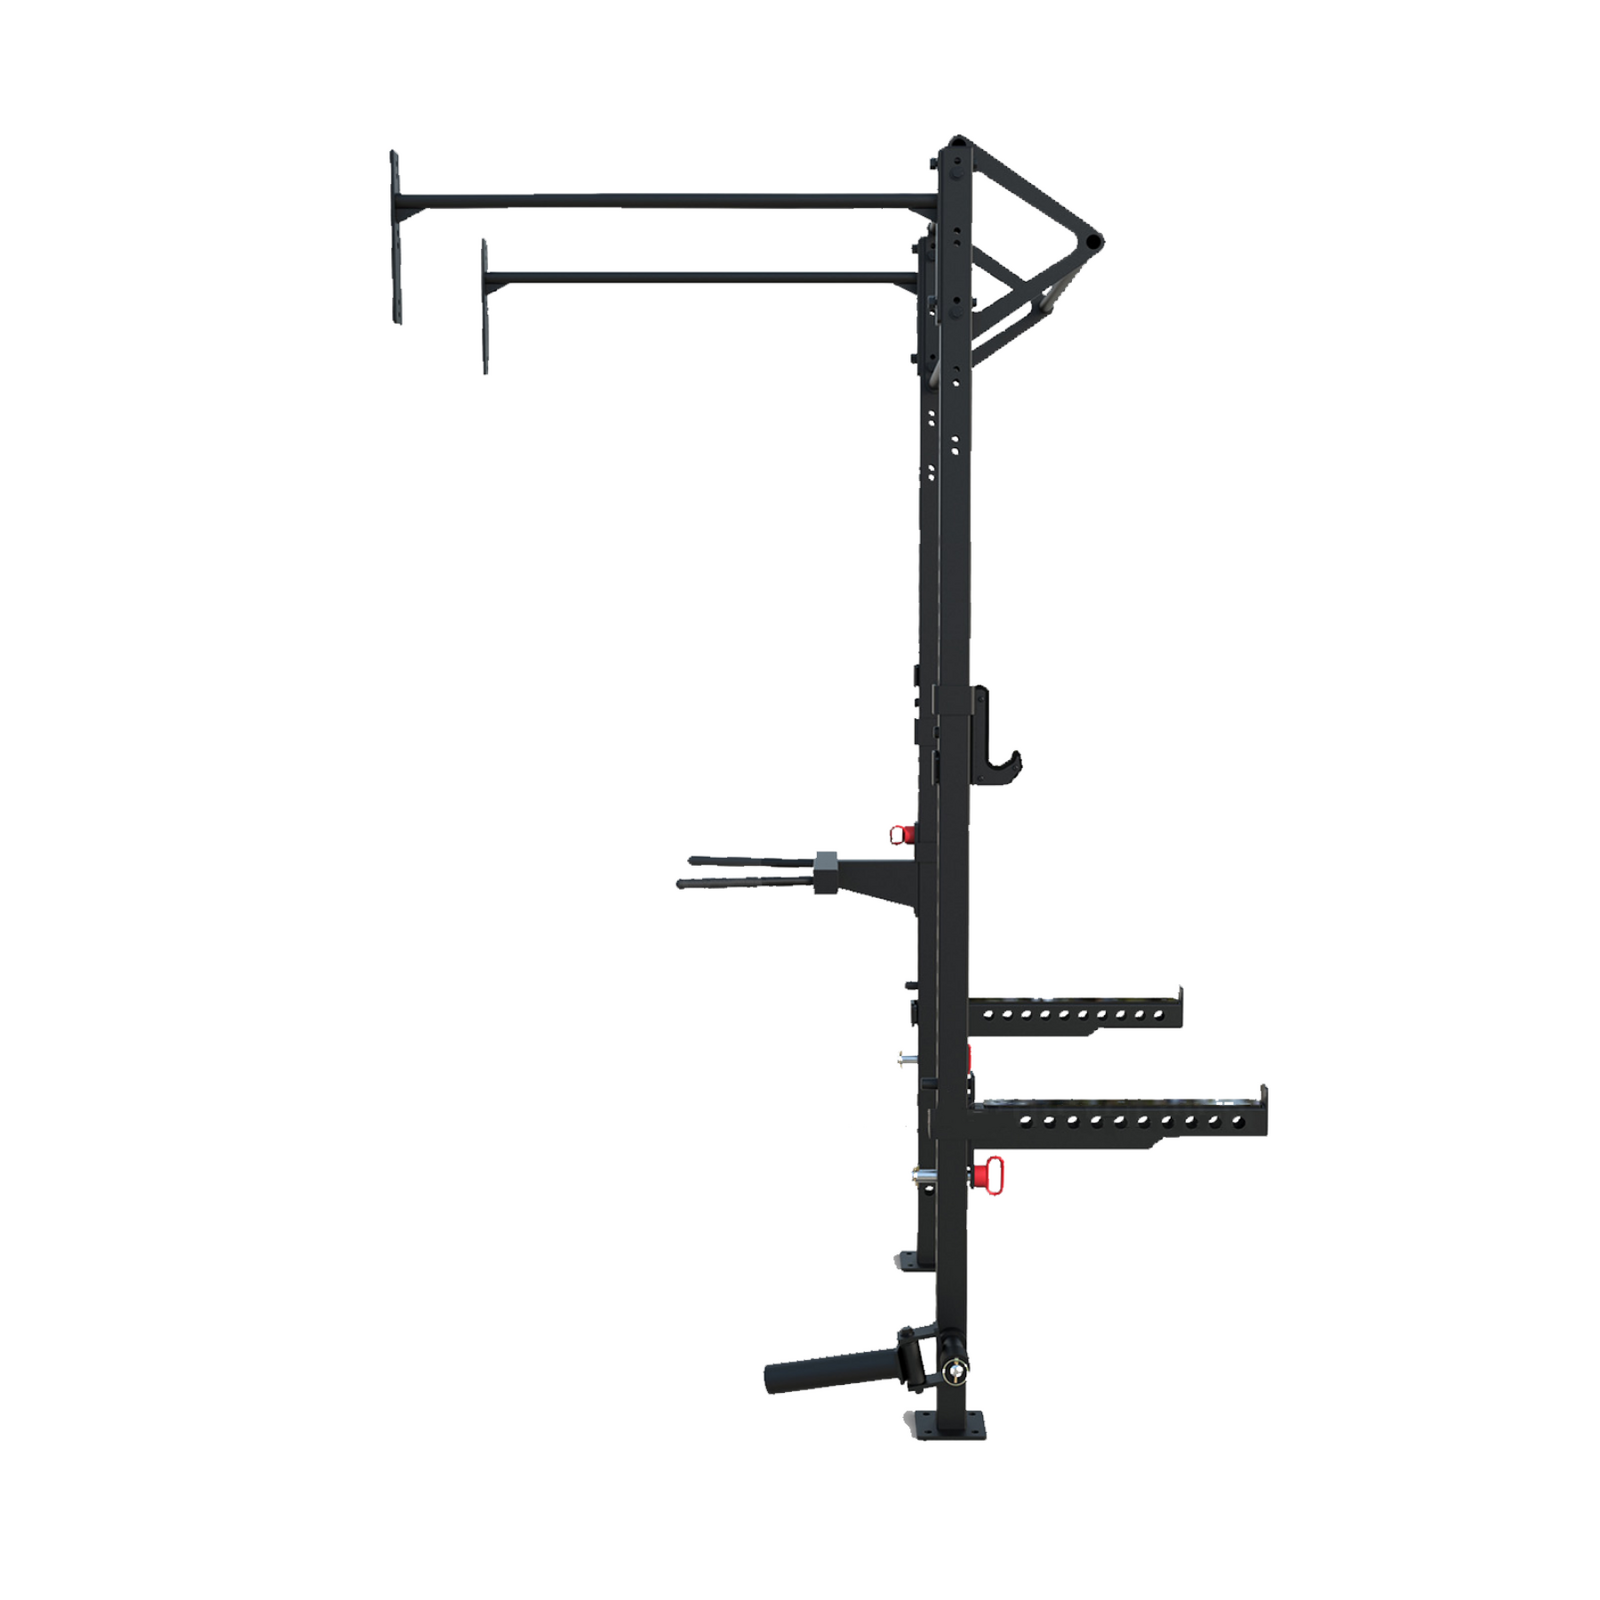 Crossfit W2 Wall Mount Rig 1 Cell Torsonator-Wall Mounted Rig-Gym Direct